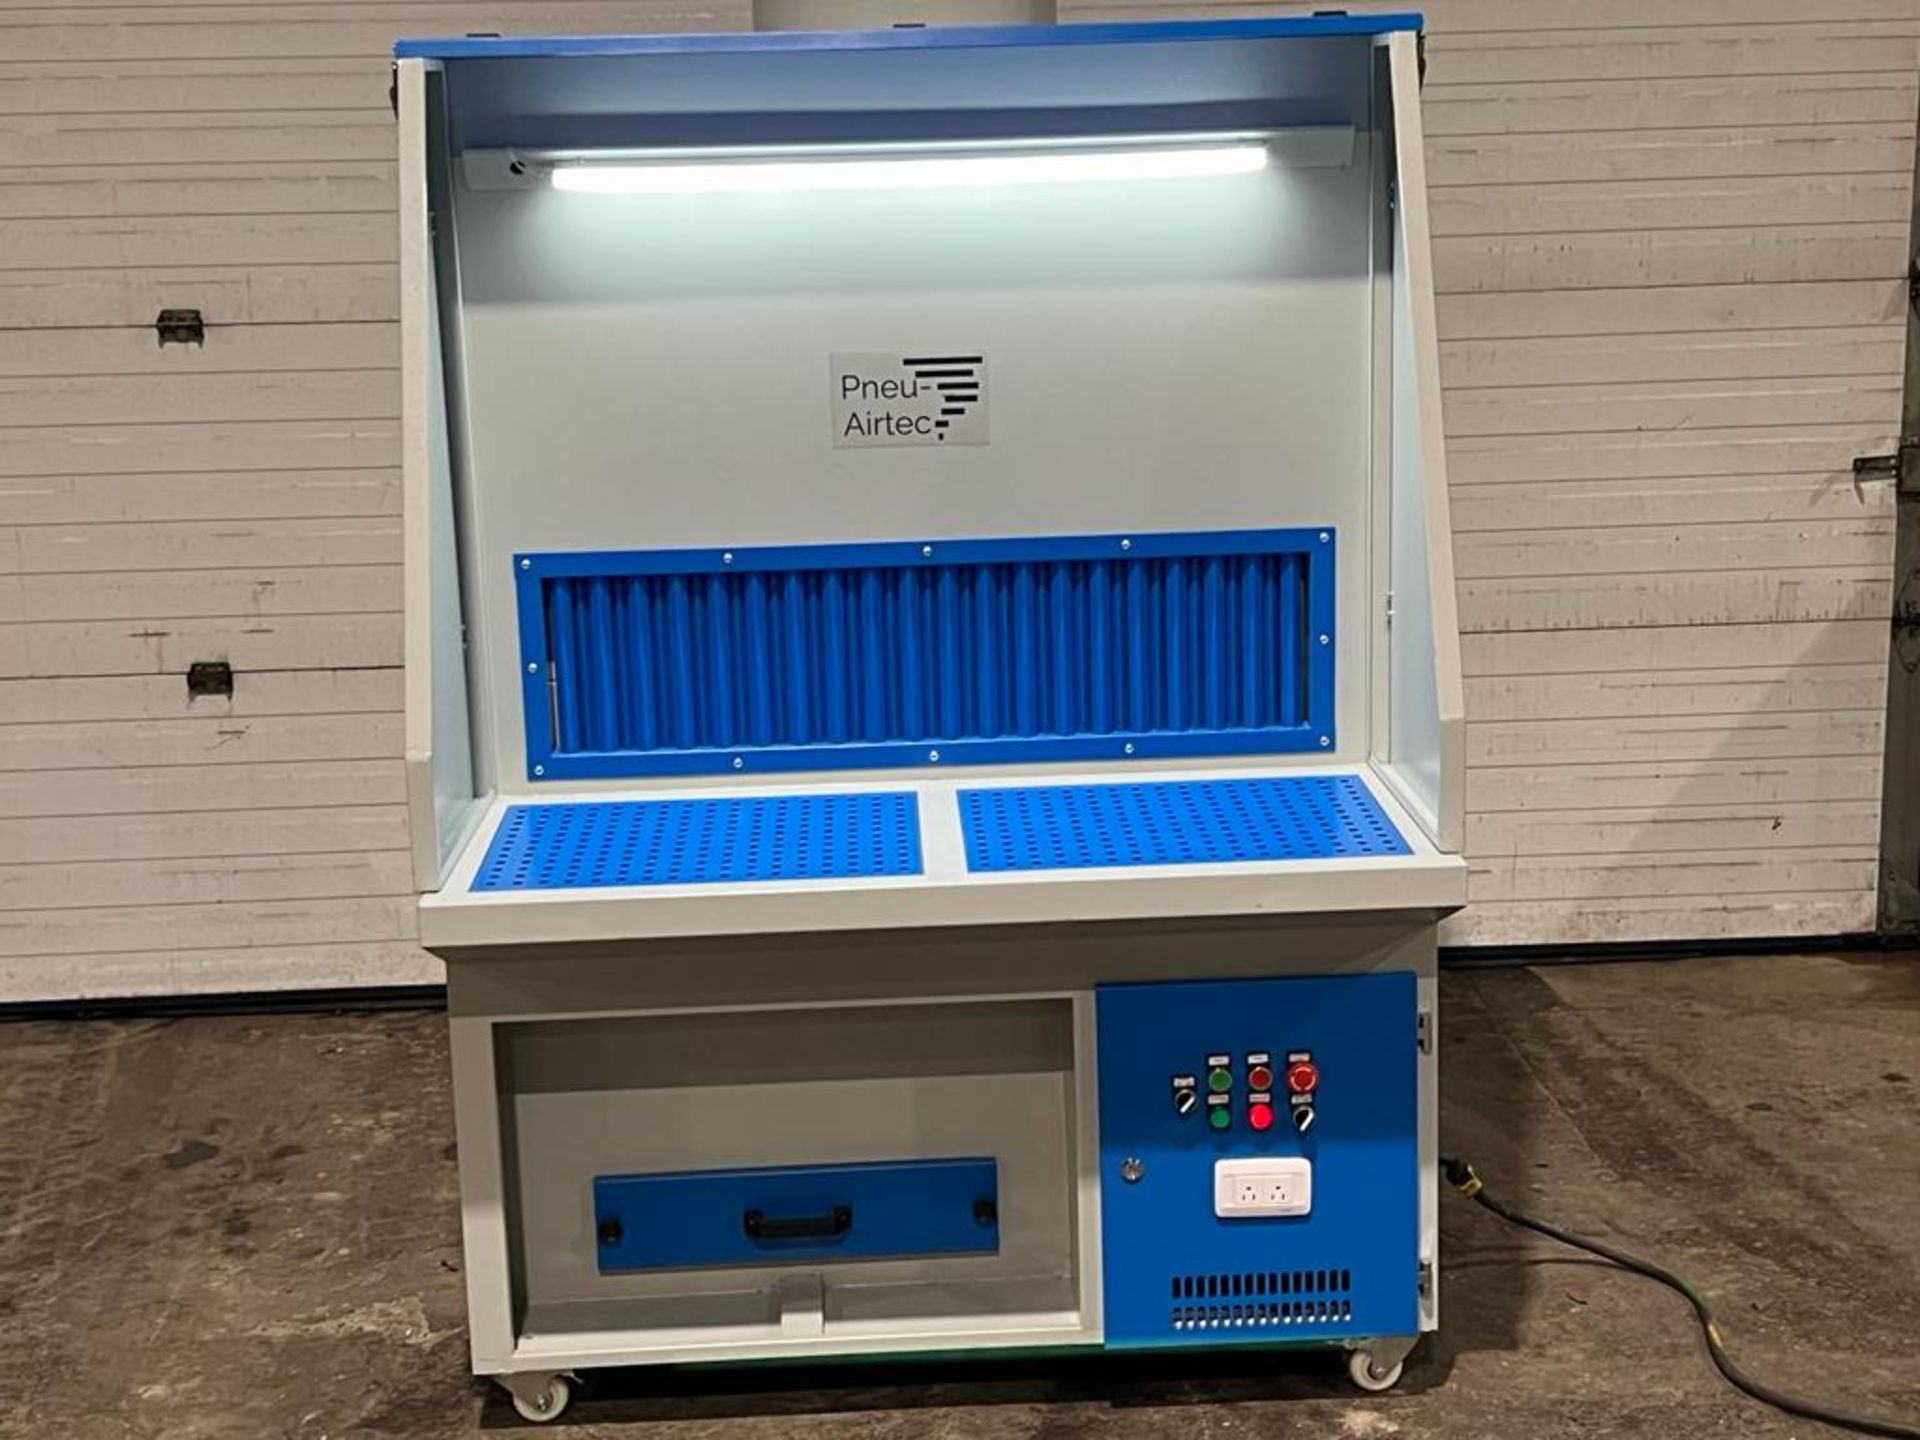 NEW Pneu-Airtec Fume Extracting Downdraft Work Table - 2.2KW 110V 1 Phase Unit with Light - Image 3 of 3